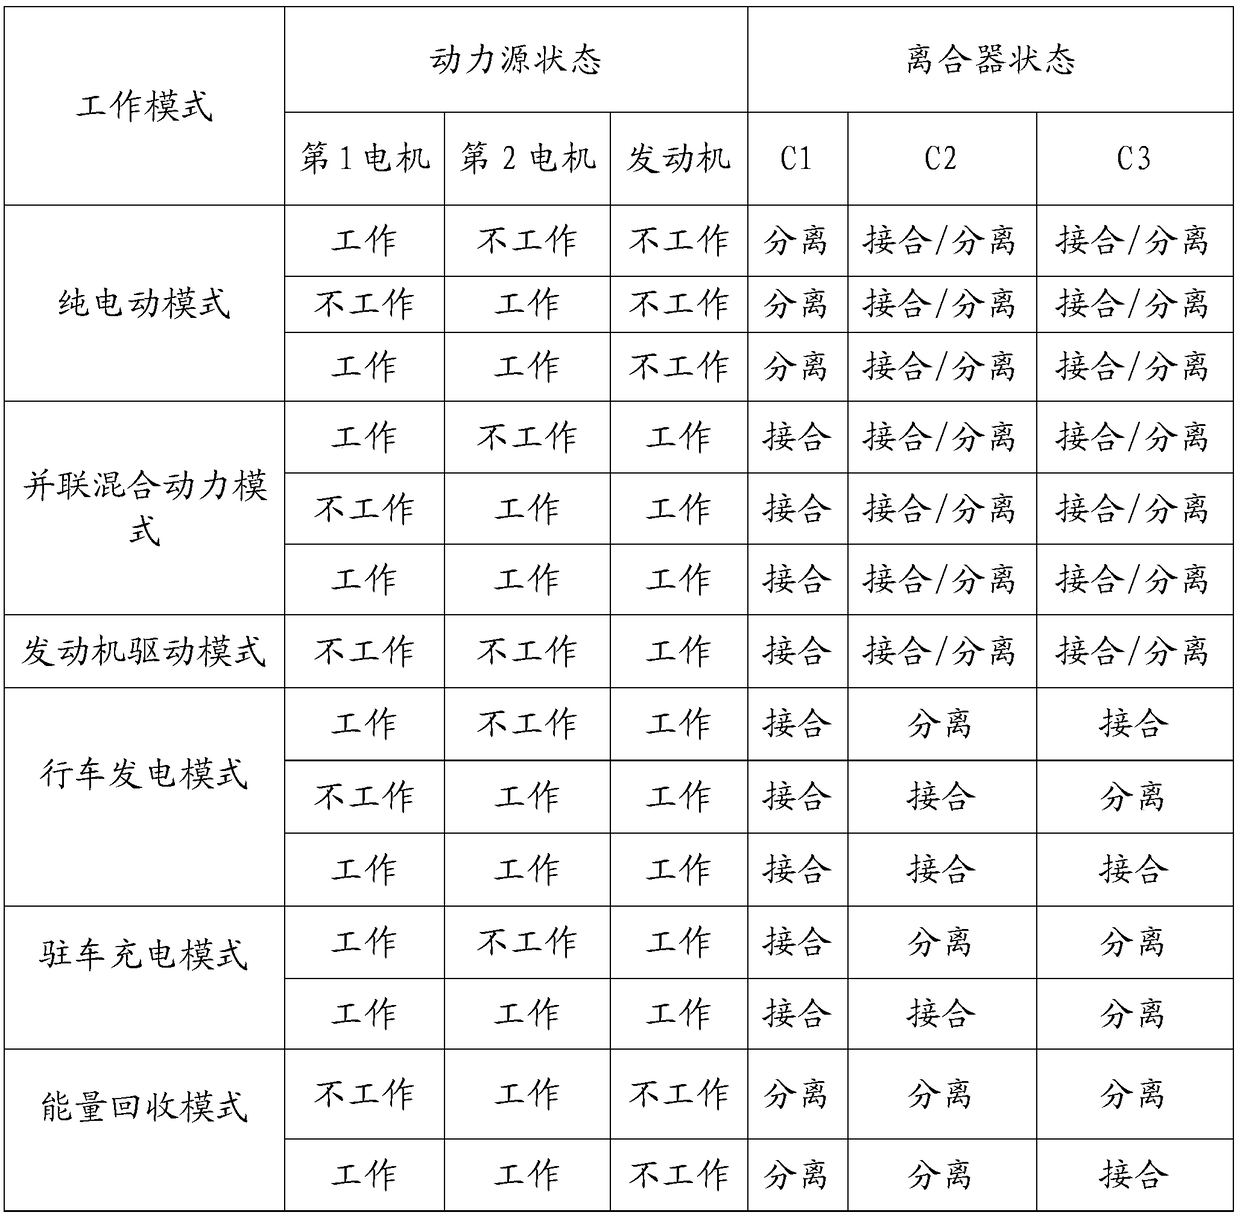 Hybrid power transmission system, control method and automobile